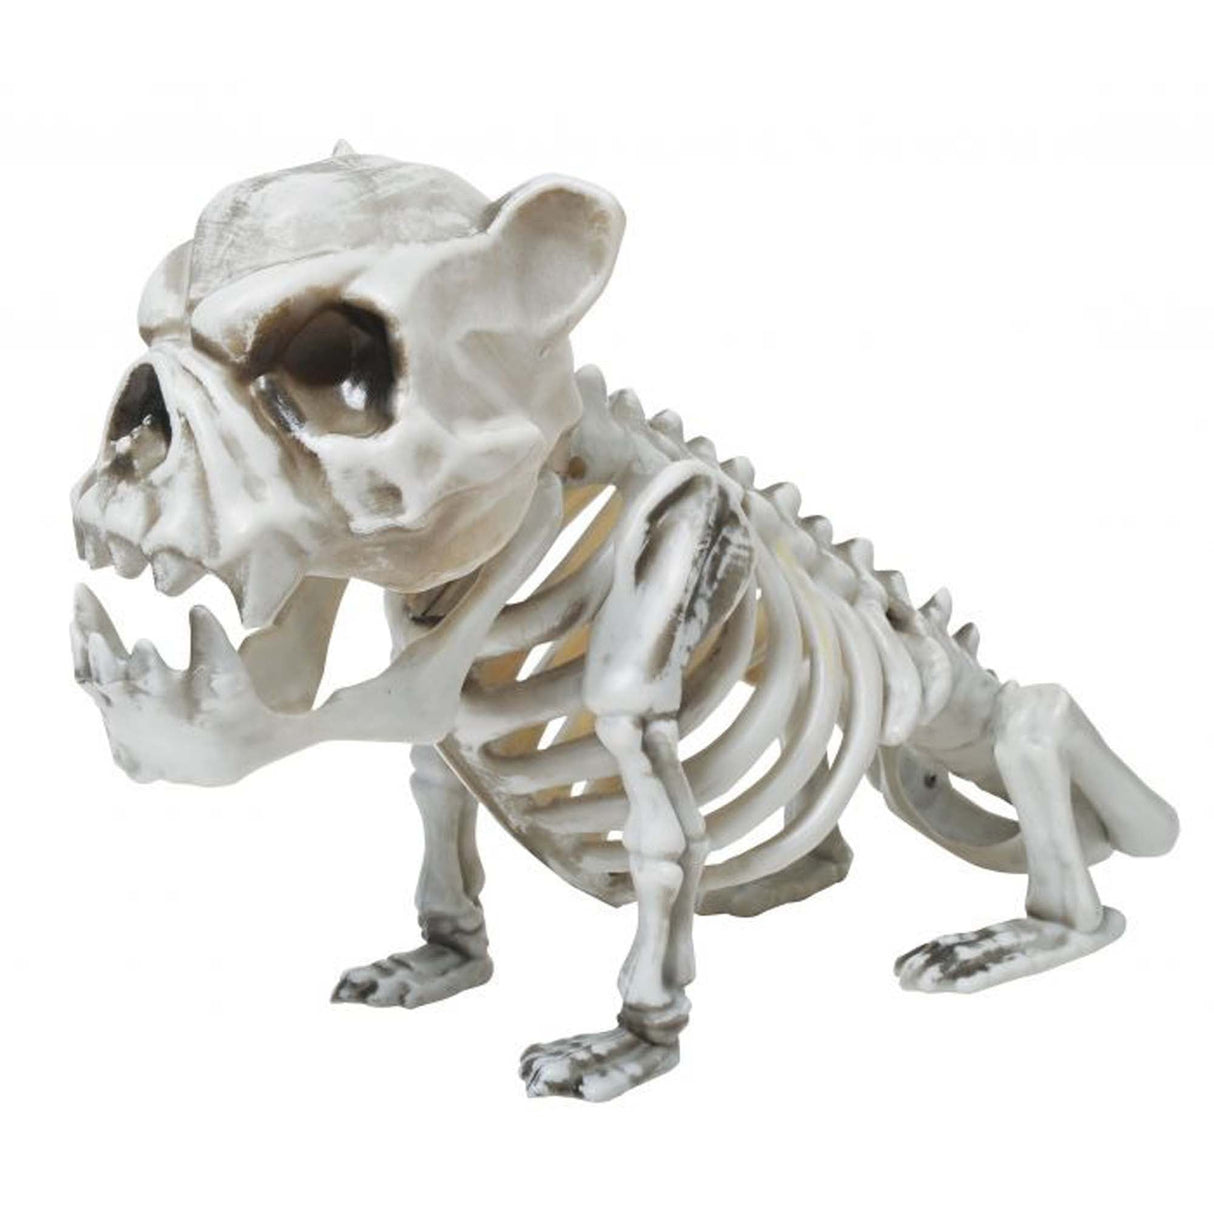 FUN WORLD Halloween Skele Bull Dog, 13 Inches, 1 Count 071765145664